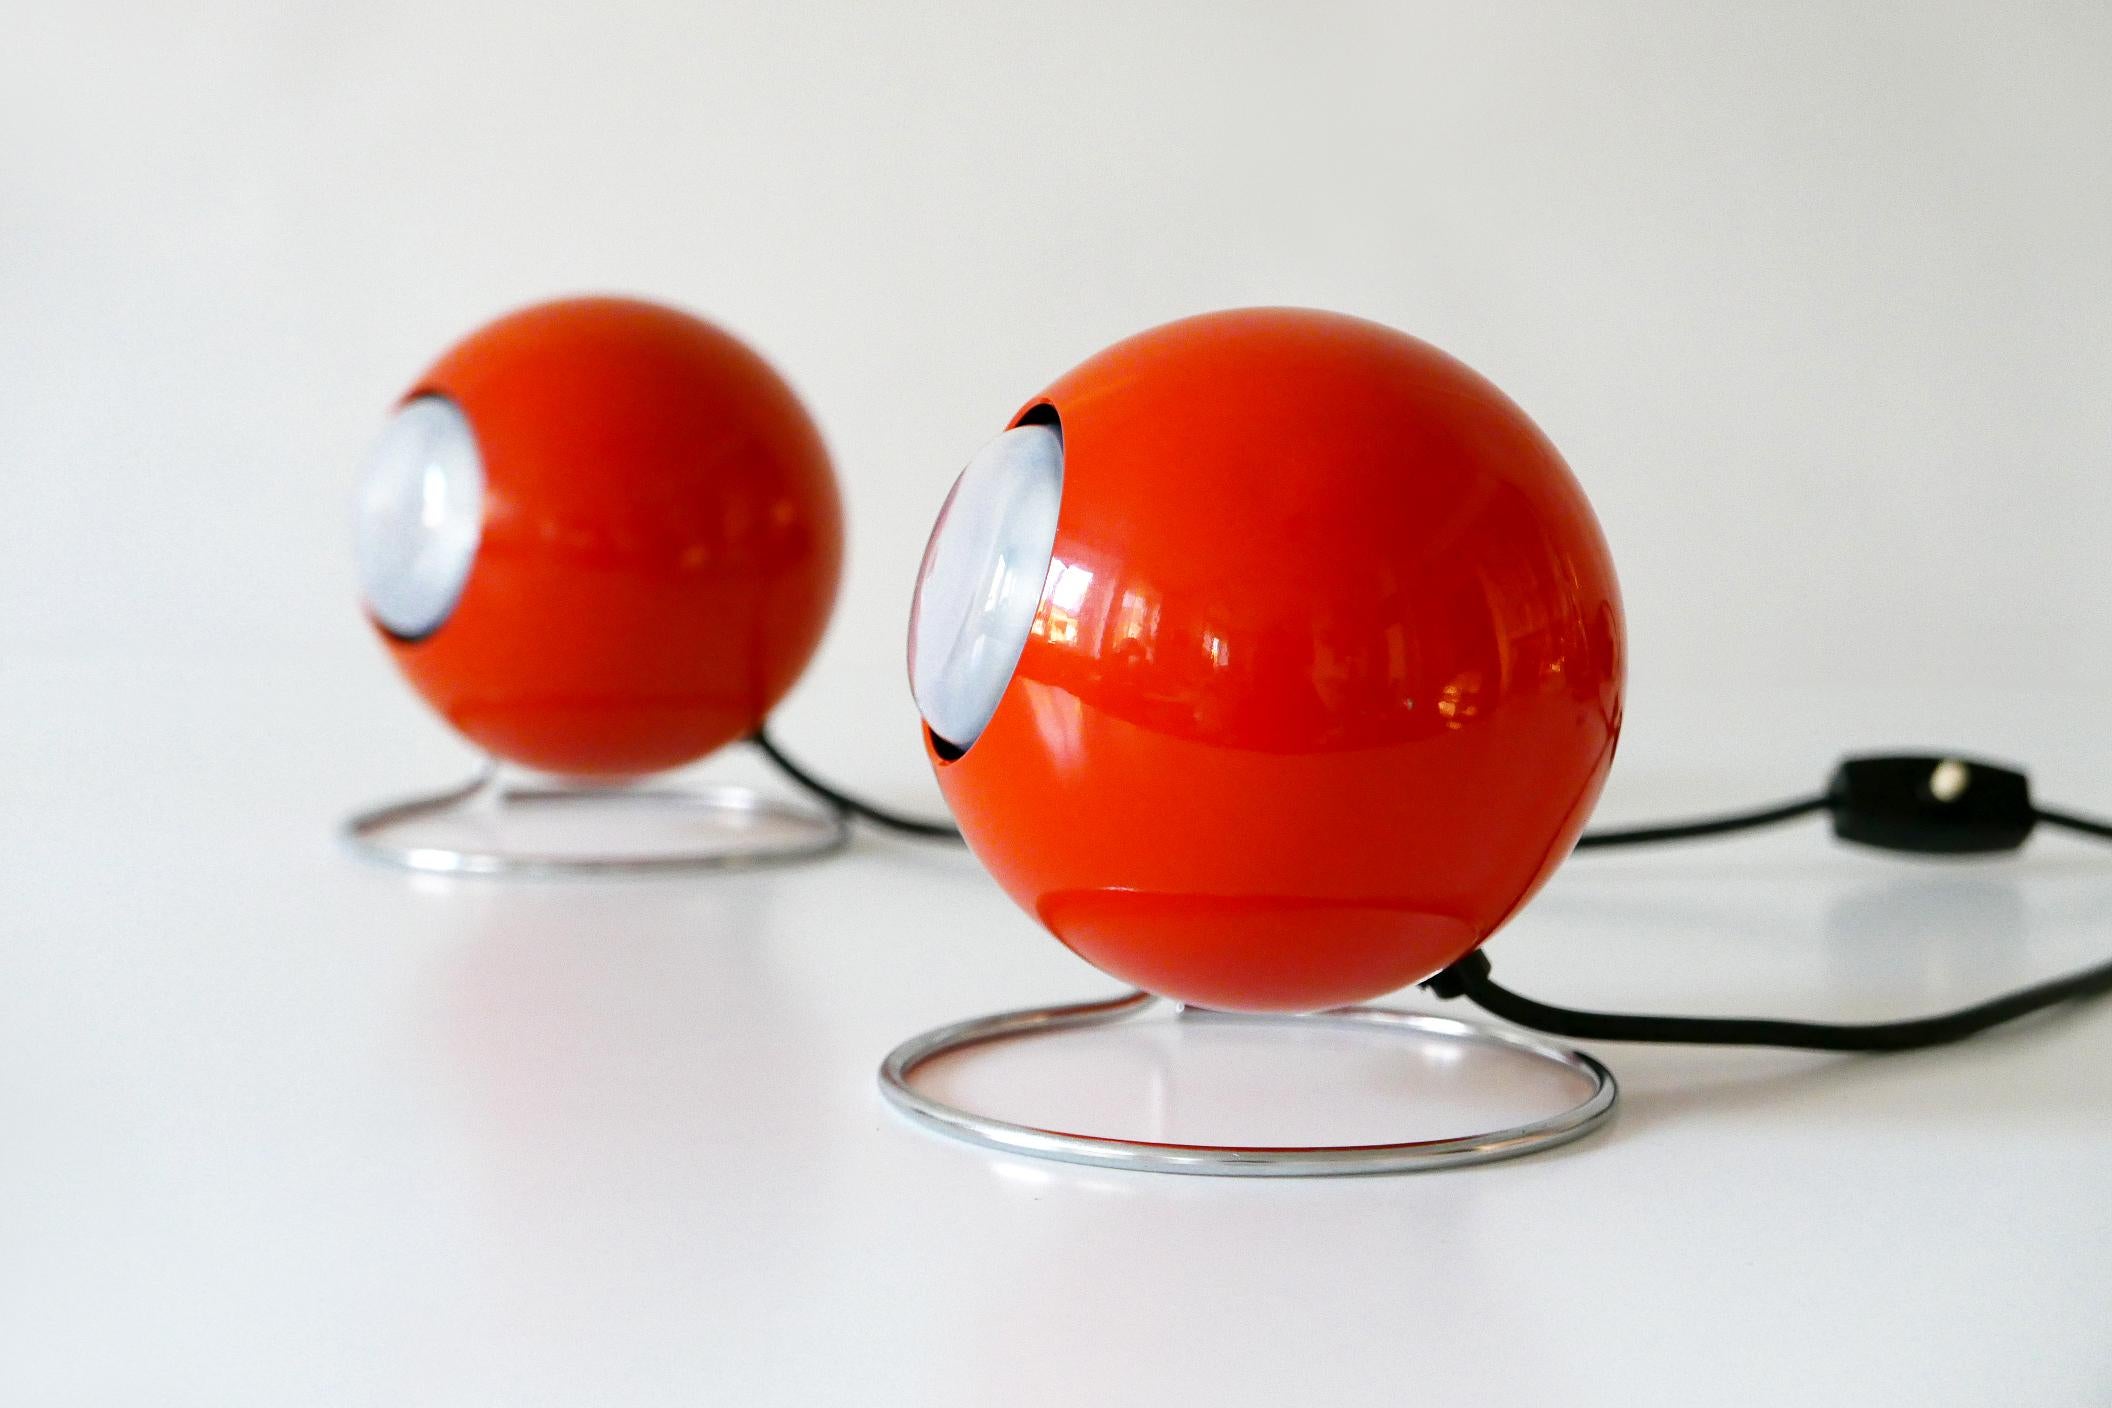 Set of Two Mid-Century Modern Metal 'Eye' Table Lamps, ERCO, 1960s-1970s Germany For Sale 9